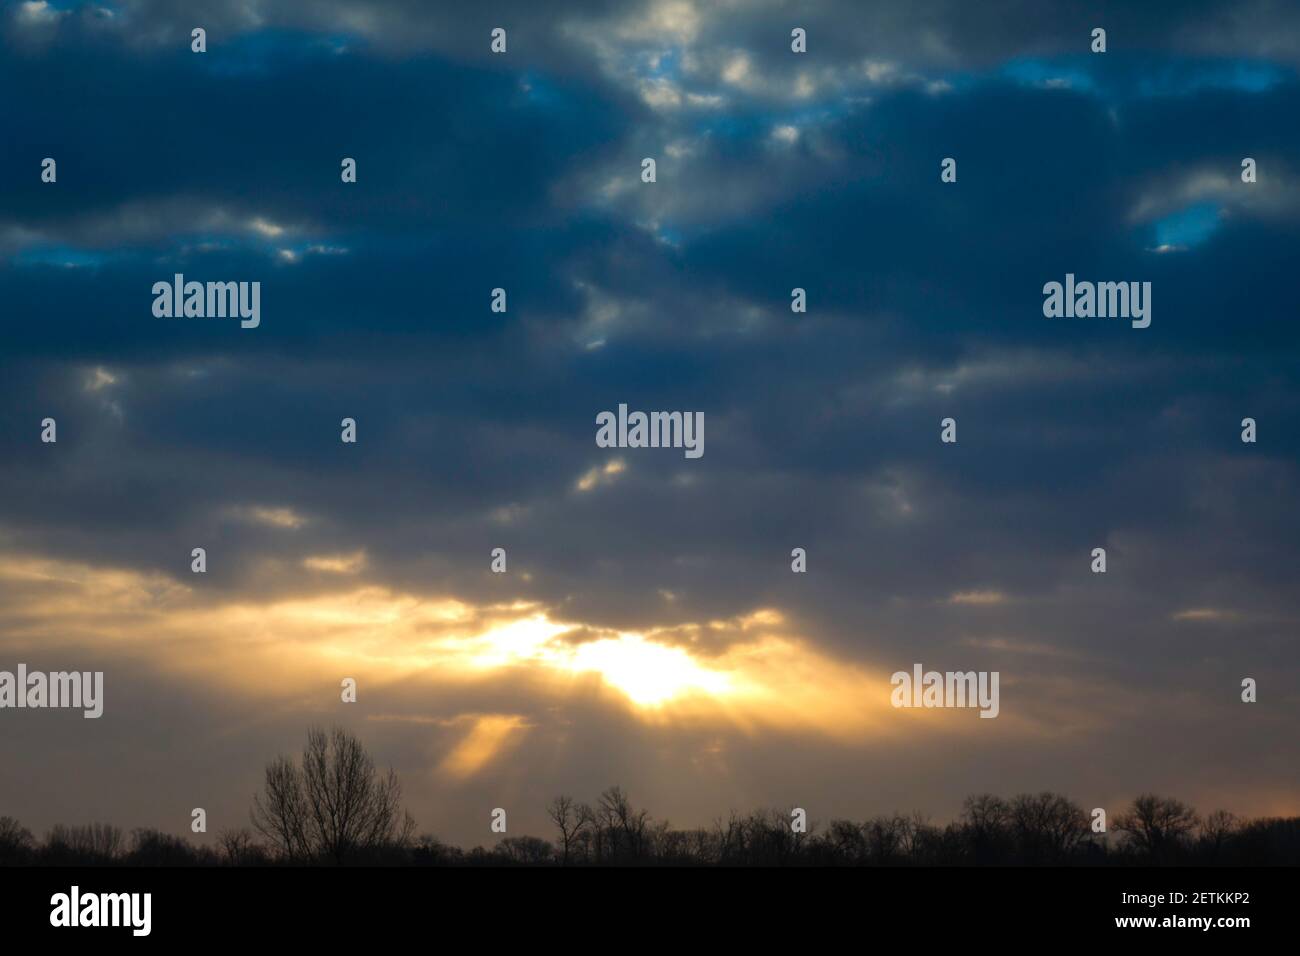 mystical heavenly sky with sun rays coming out from behind clouds Stock Photo